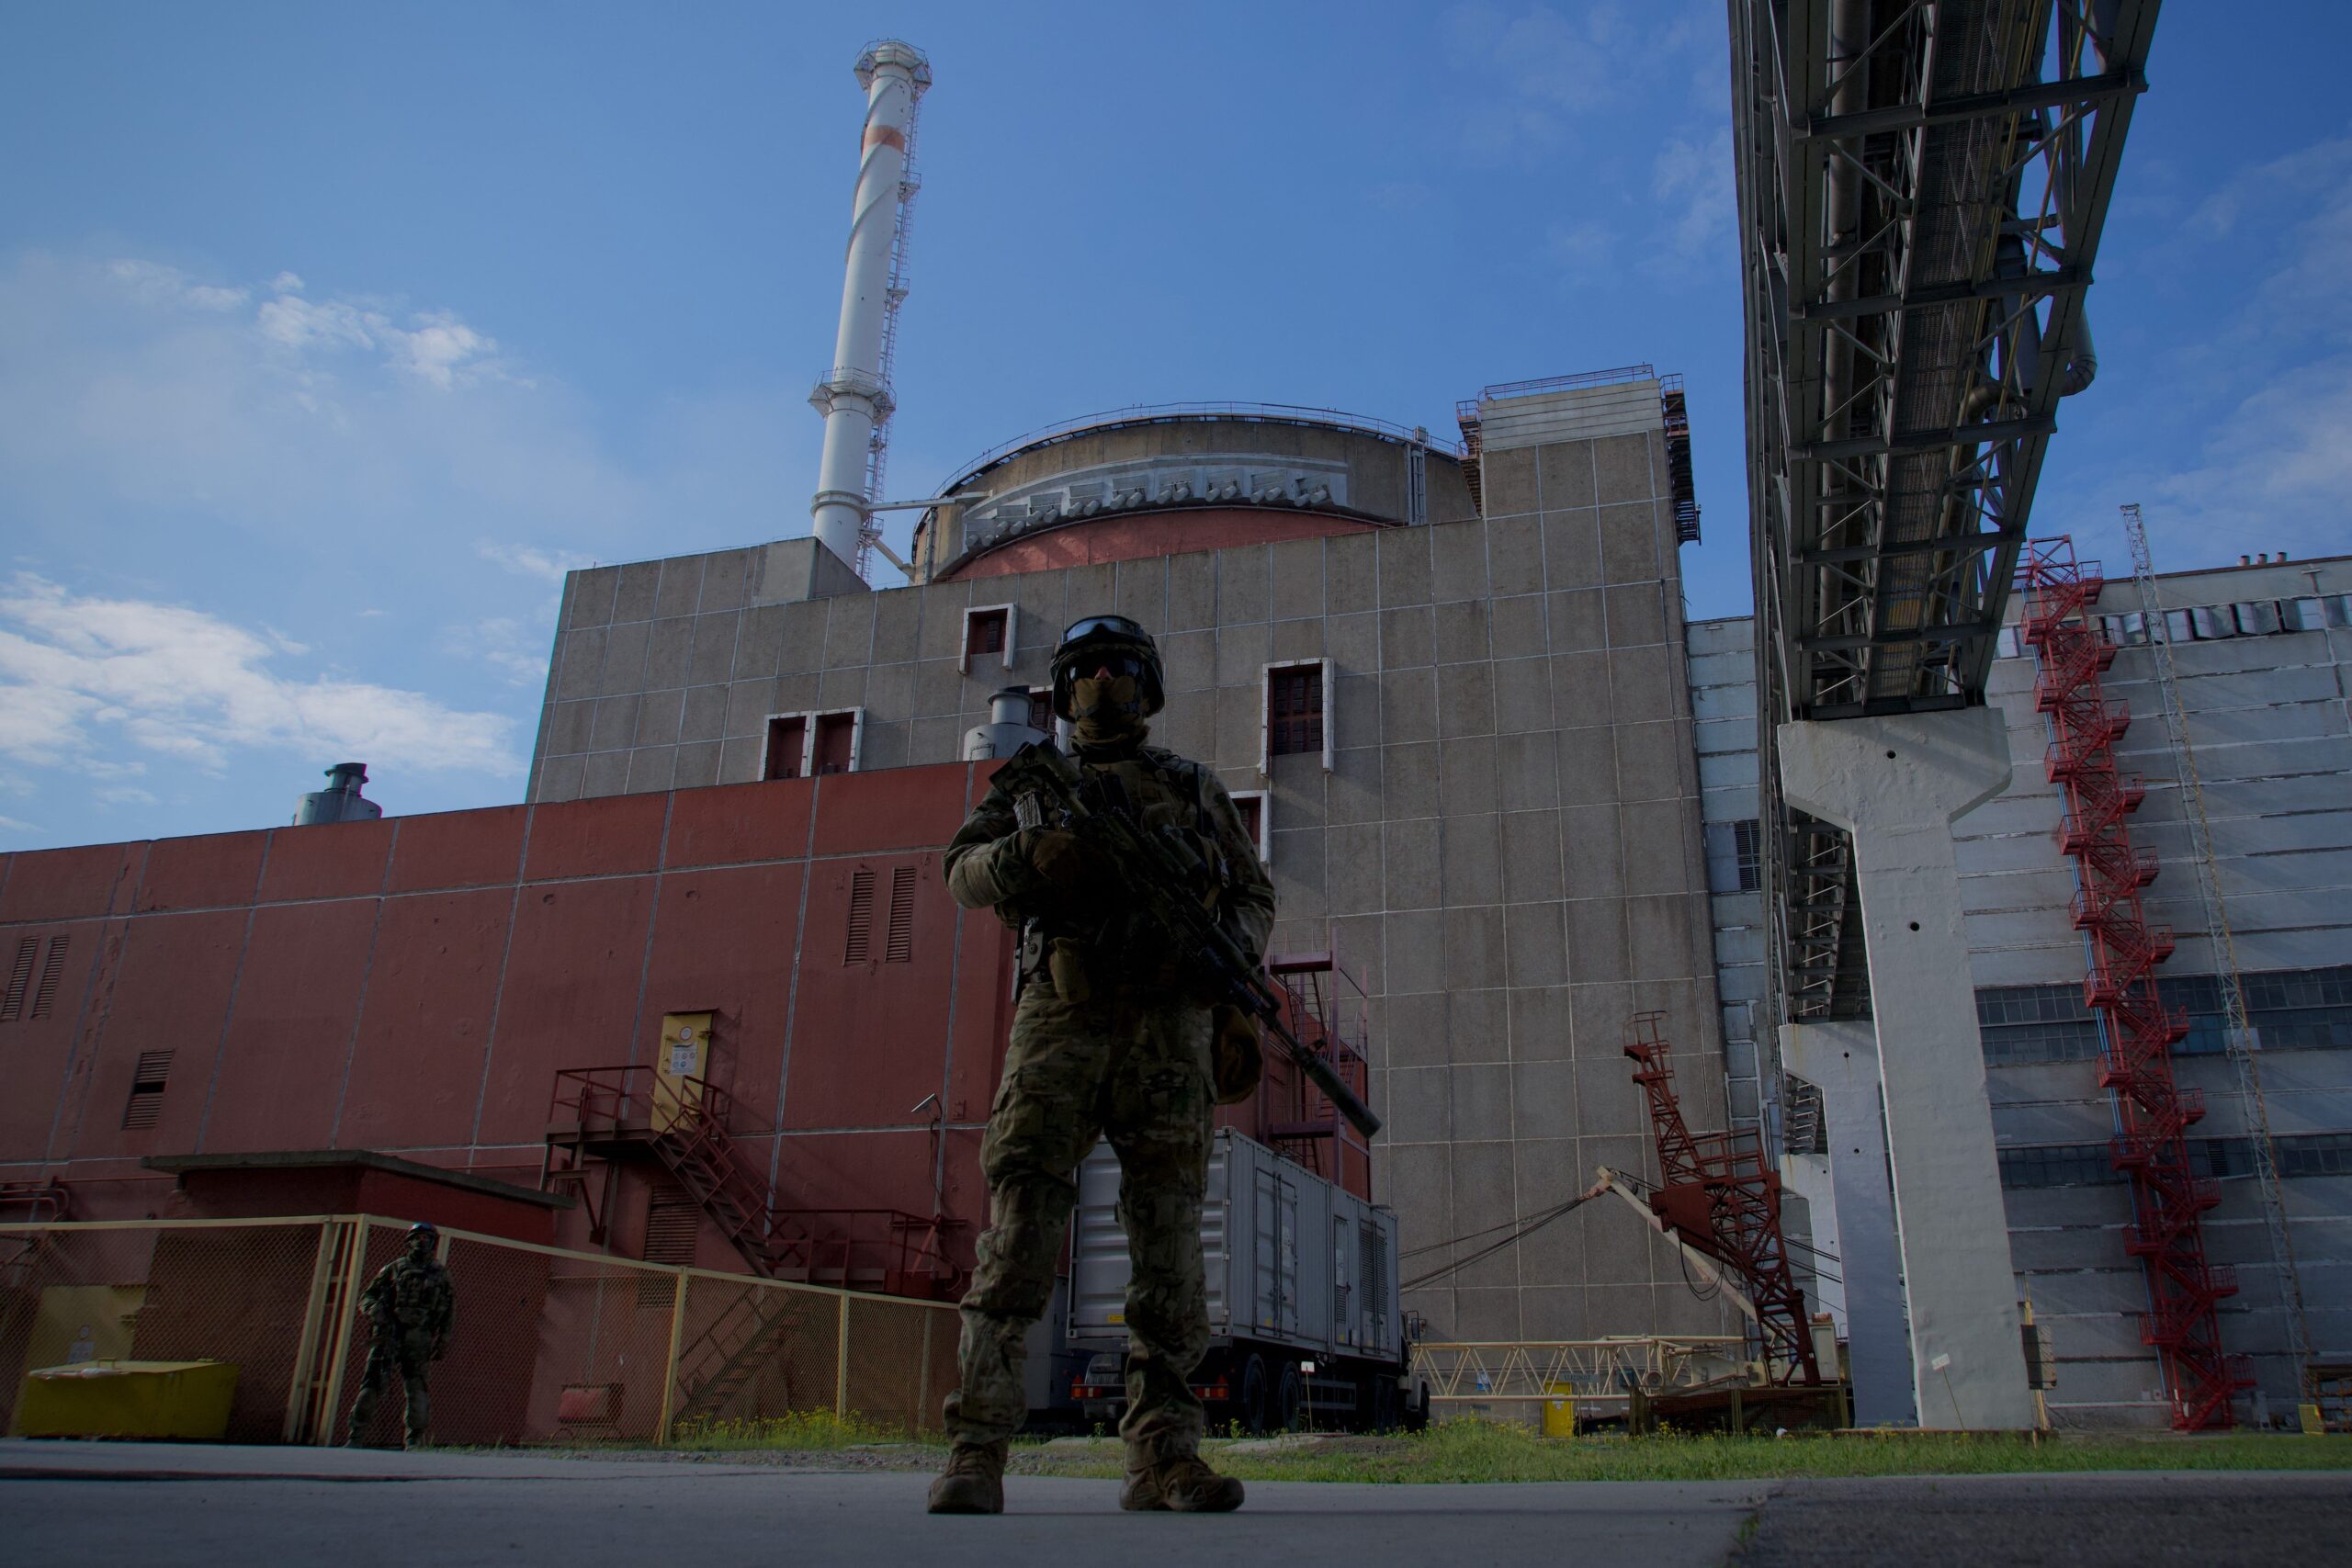 Ukraine: Russia’s military activities at nuclear plant risk safety in region